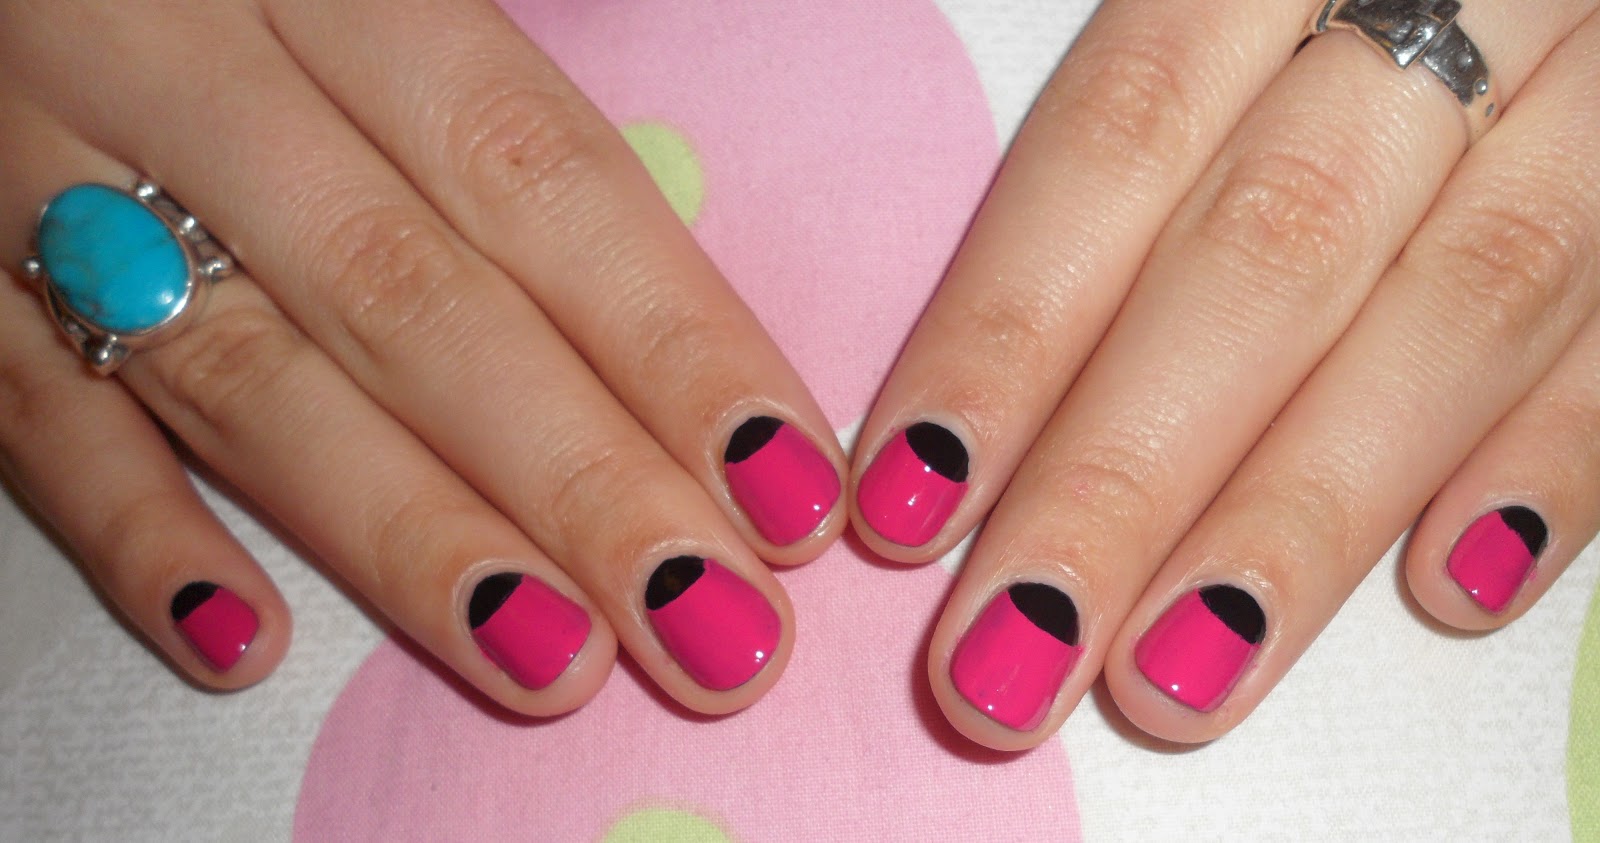 2. Step-by-Step Guide to Achieving the Perfect Half Moon Manicure - wide 9